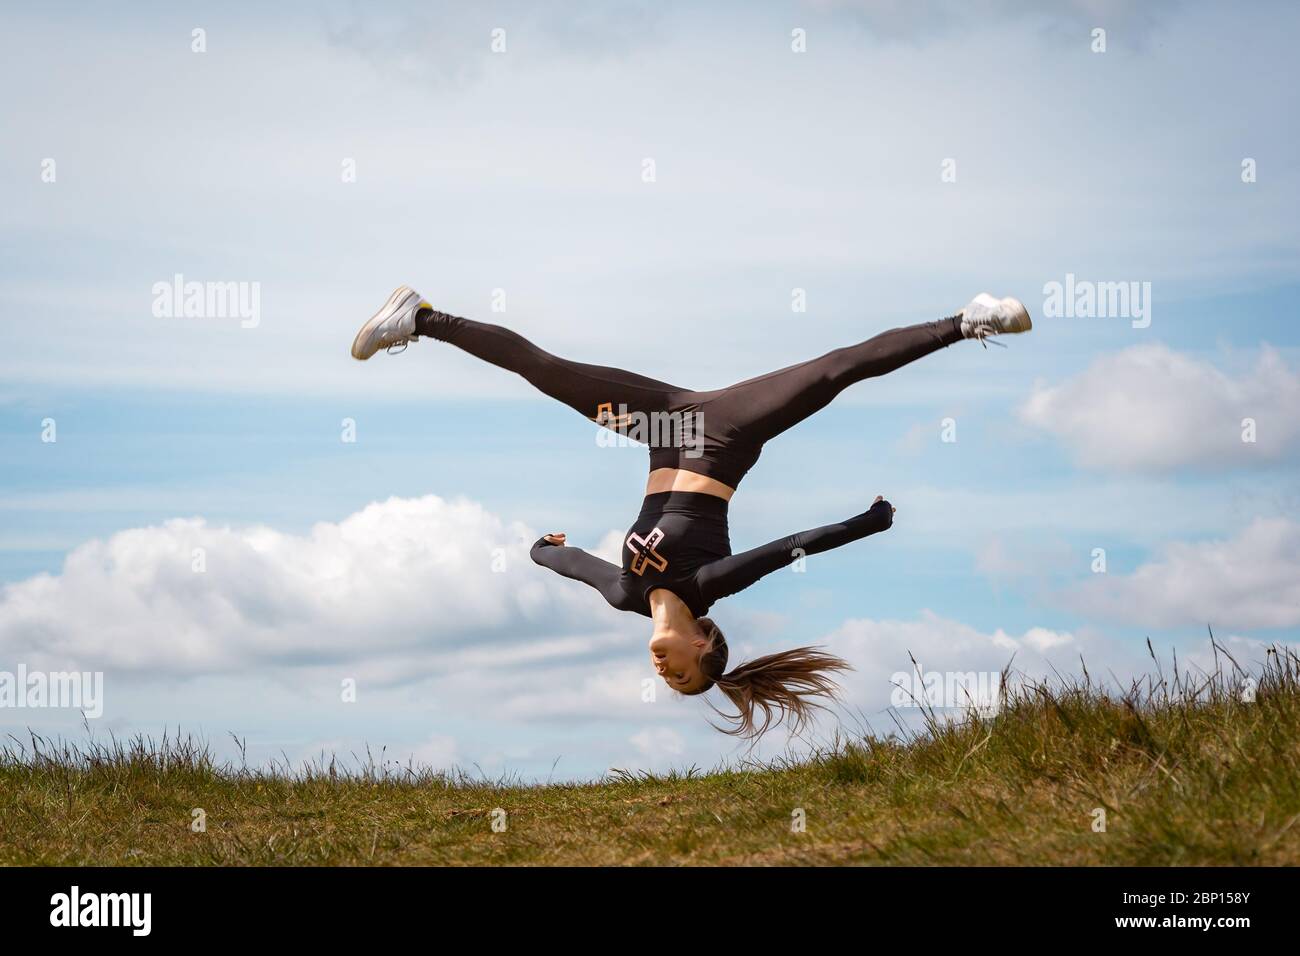 Acrobatics in the park, Waseley Hills, Worcs, UK. 17th May, 2020. After the slight easing of the lockdown in England, 15-year-old Amelia Hubbard can at last practice her acrobatic dance moves in her local open space at Waseley Hills Country Park, Worcestershire, rather than in her back garden at home. Amelia is hoping to take up a place at Birmingham Ormston Academy to study Dance full time, and is happy that she has not needed to take her GCSE exams this year due to schools being closed. Credit: Peter Lopeman/Alamy Live News Stock Photo